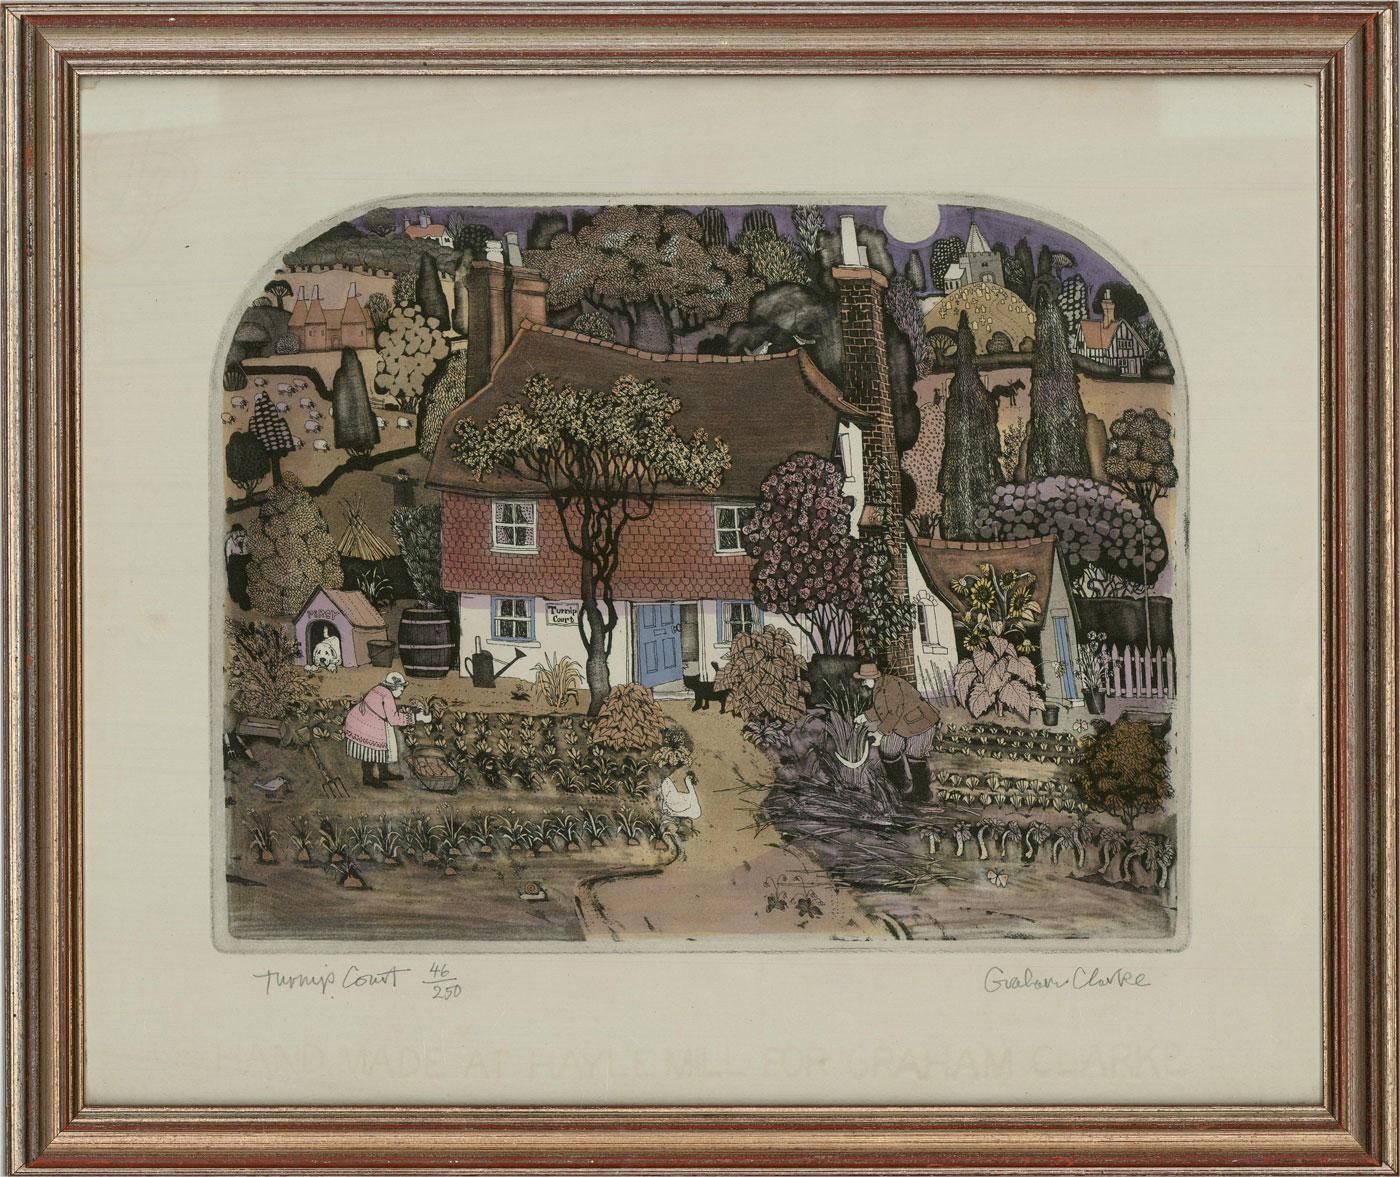 A very handsome etching with aquatint by the artist Graham Clarke (b.1941), entitled 'Turnip Court.' The scene shows a bustling farm cottage with a turnip patch out front. Animals wander through the vegetables and a man and woman tend to the